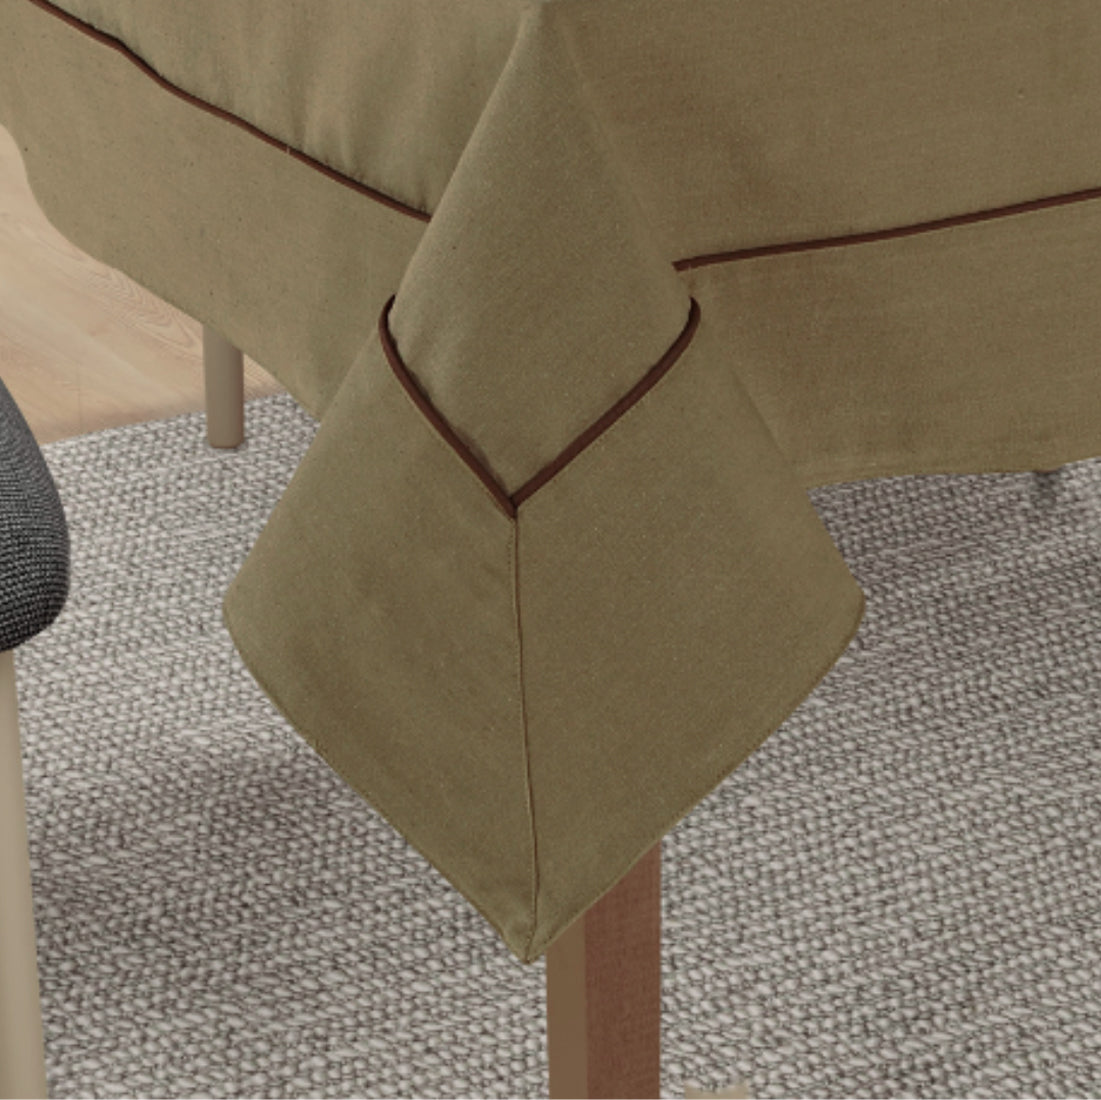 VIRGO Woven Cotton Plain Table Cover - Taupe